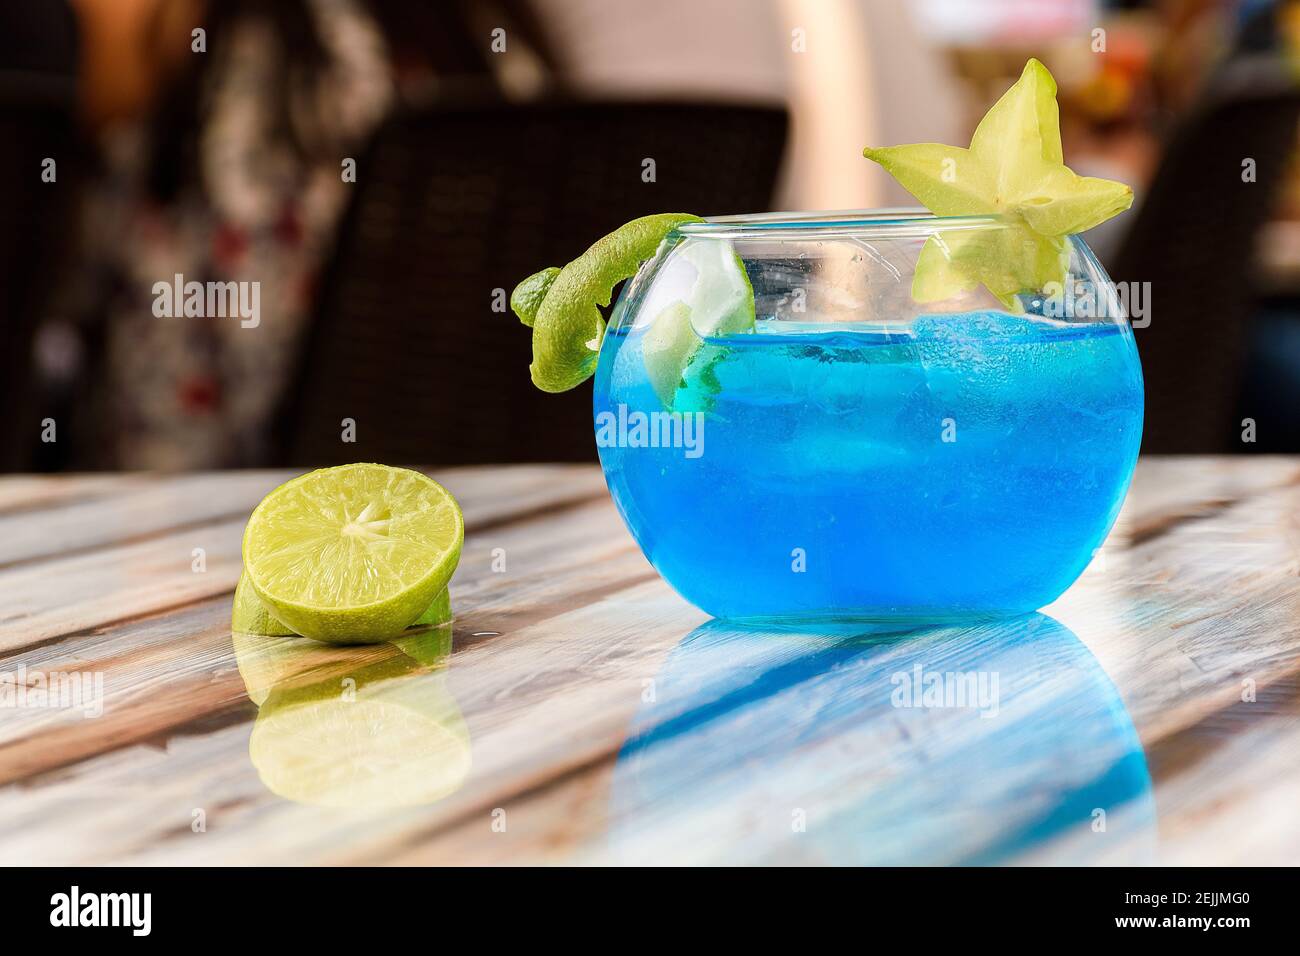 Close-up of a blue lemonade drink served in a large fishbowl Stock Photo